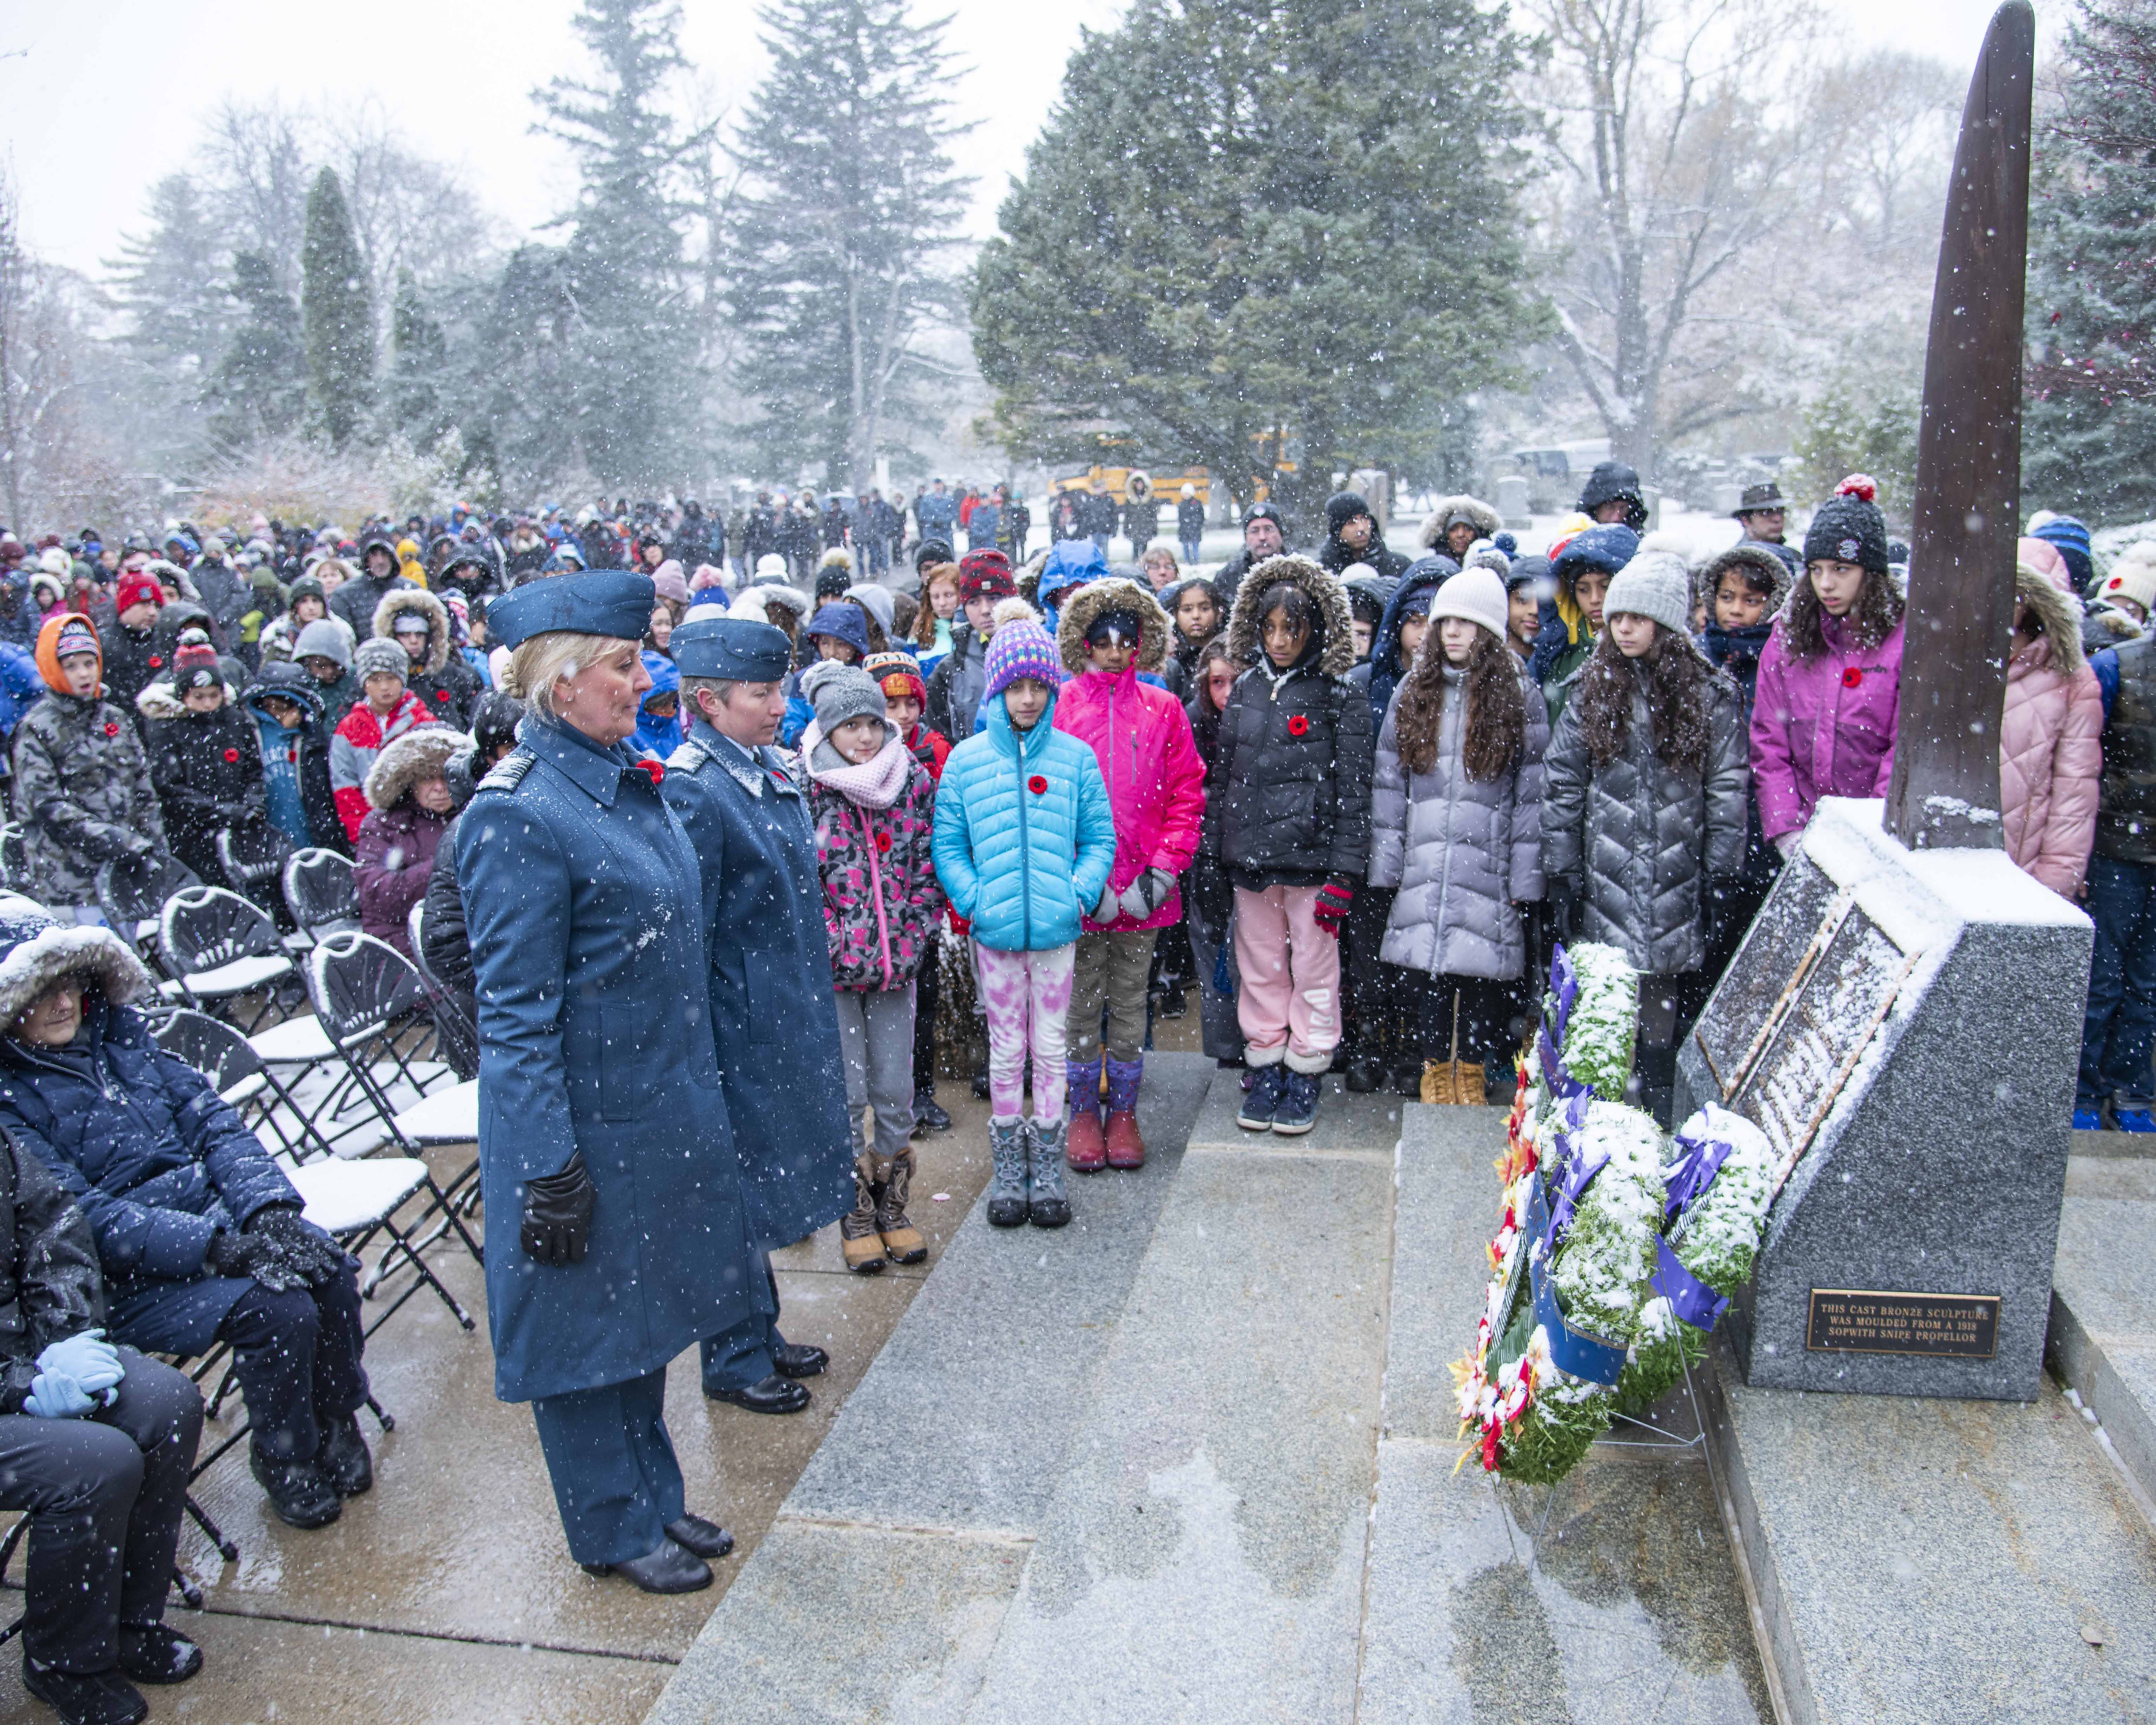 16 Wing’s Honorary Colonel Renee Van Kessel (left) and Lieutenant-Colonel Jennifer Morrison, commander of 16 Wing Borden, Ontario, pause after laying a wreath on behalf of 16 Wing during the 2019 Remembrance Day ceremony held at the mausoleum where Wing Commander William Barker, VC, is interred in Mount Pleasant Cemetery, Toronto. The wreaths are laid in front of a monument commemorating Wing Commander Barker. PHOTO: Corporal Lynette Ai Dang, BM10-2019-0359-031